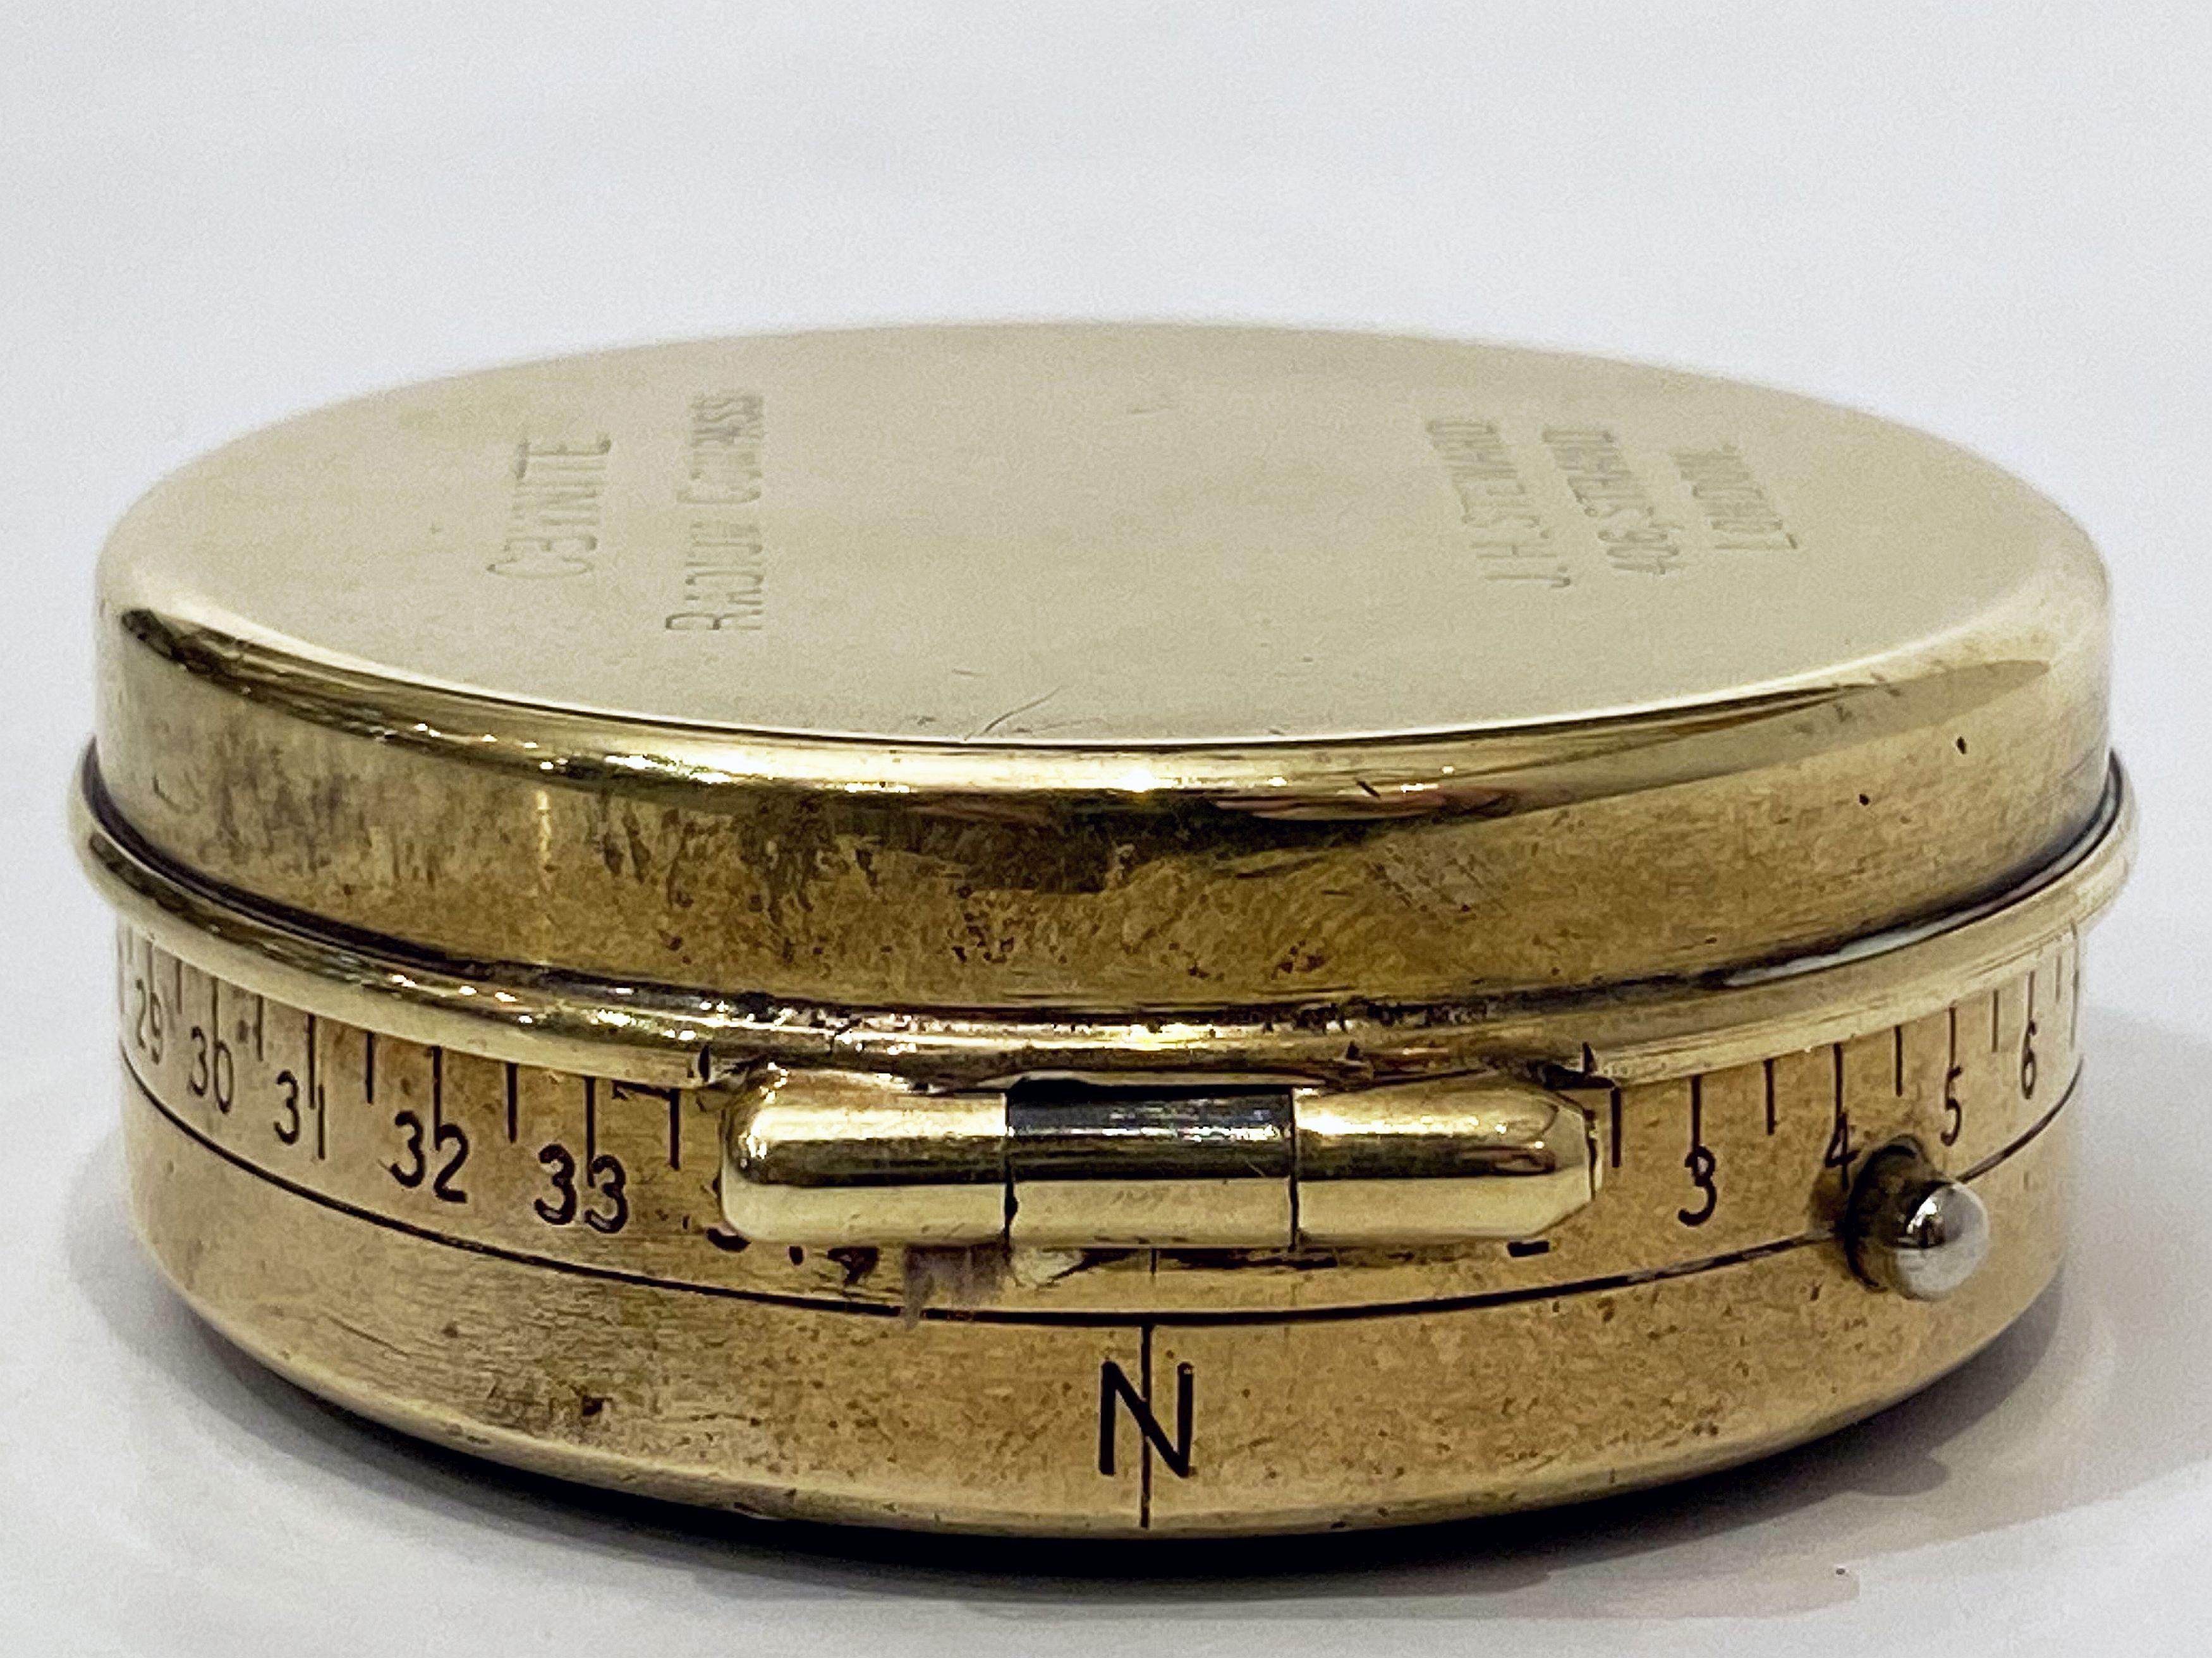 WWI Military Officer's Marching Compass, Cbynite Radium Compass 5